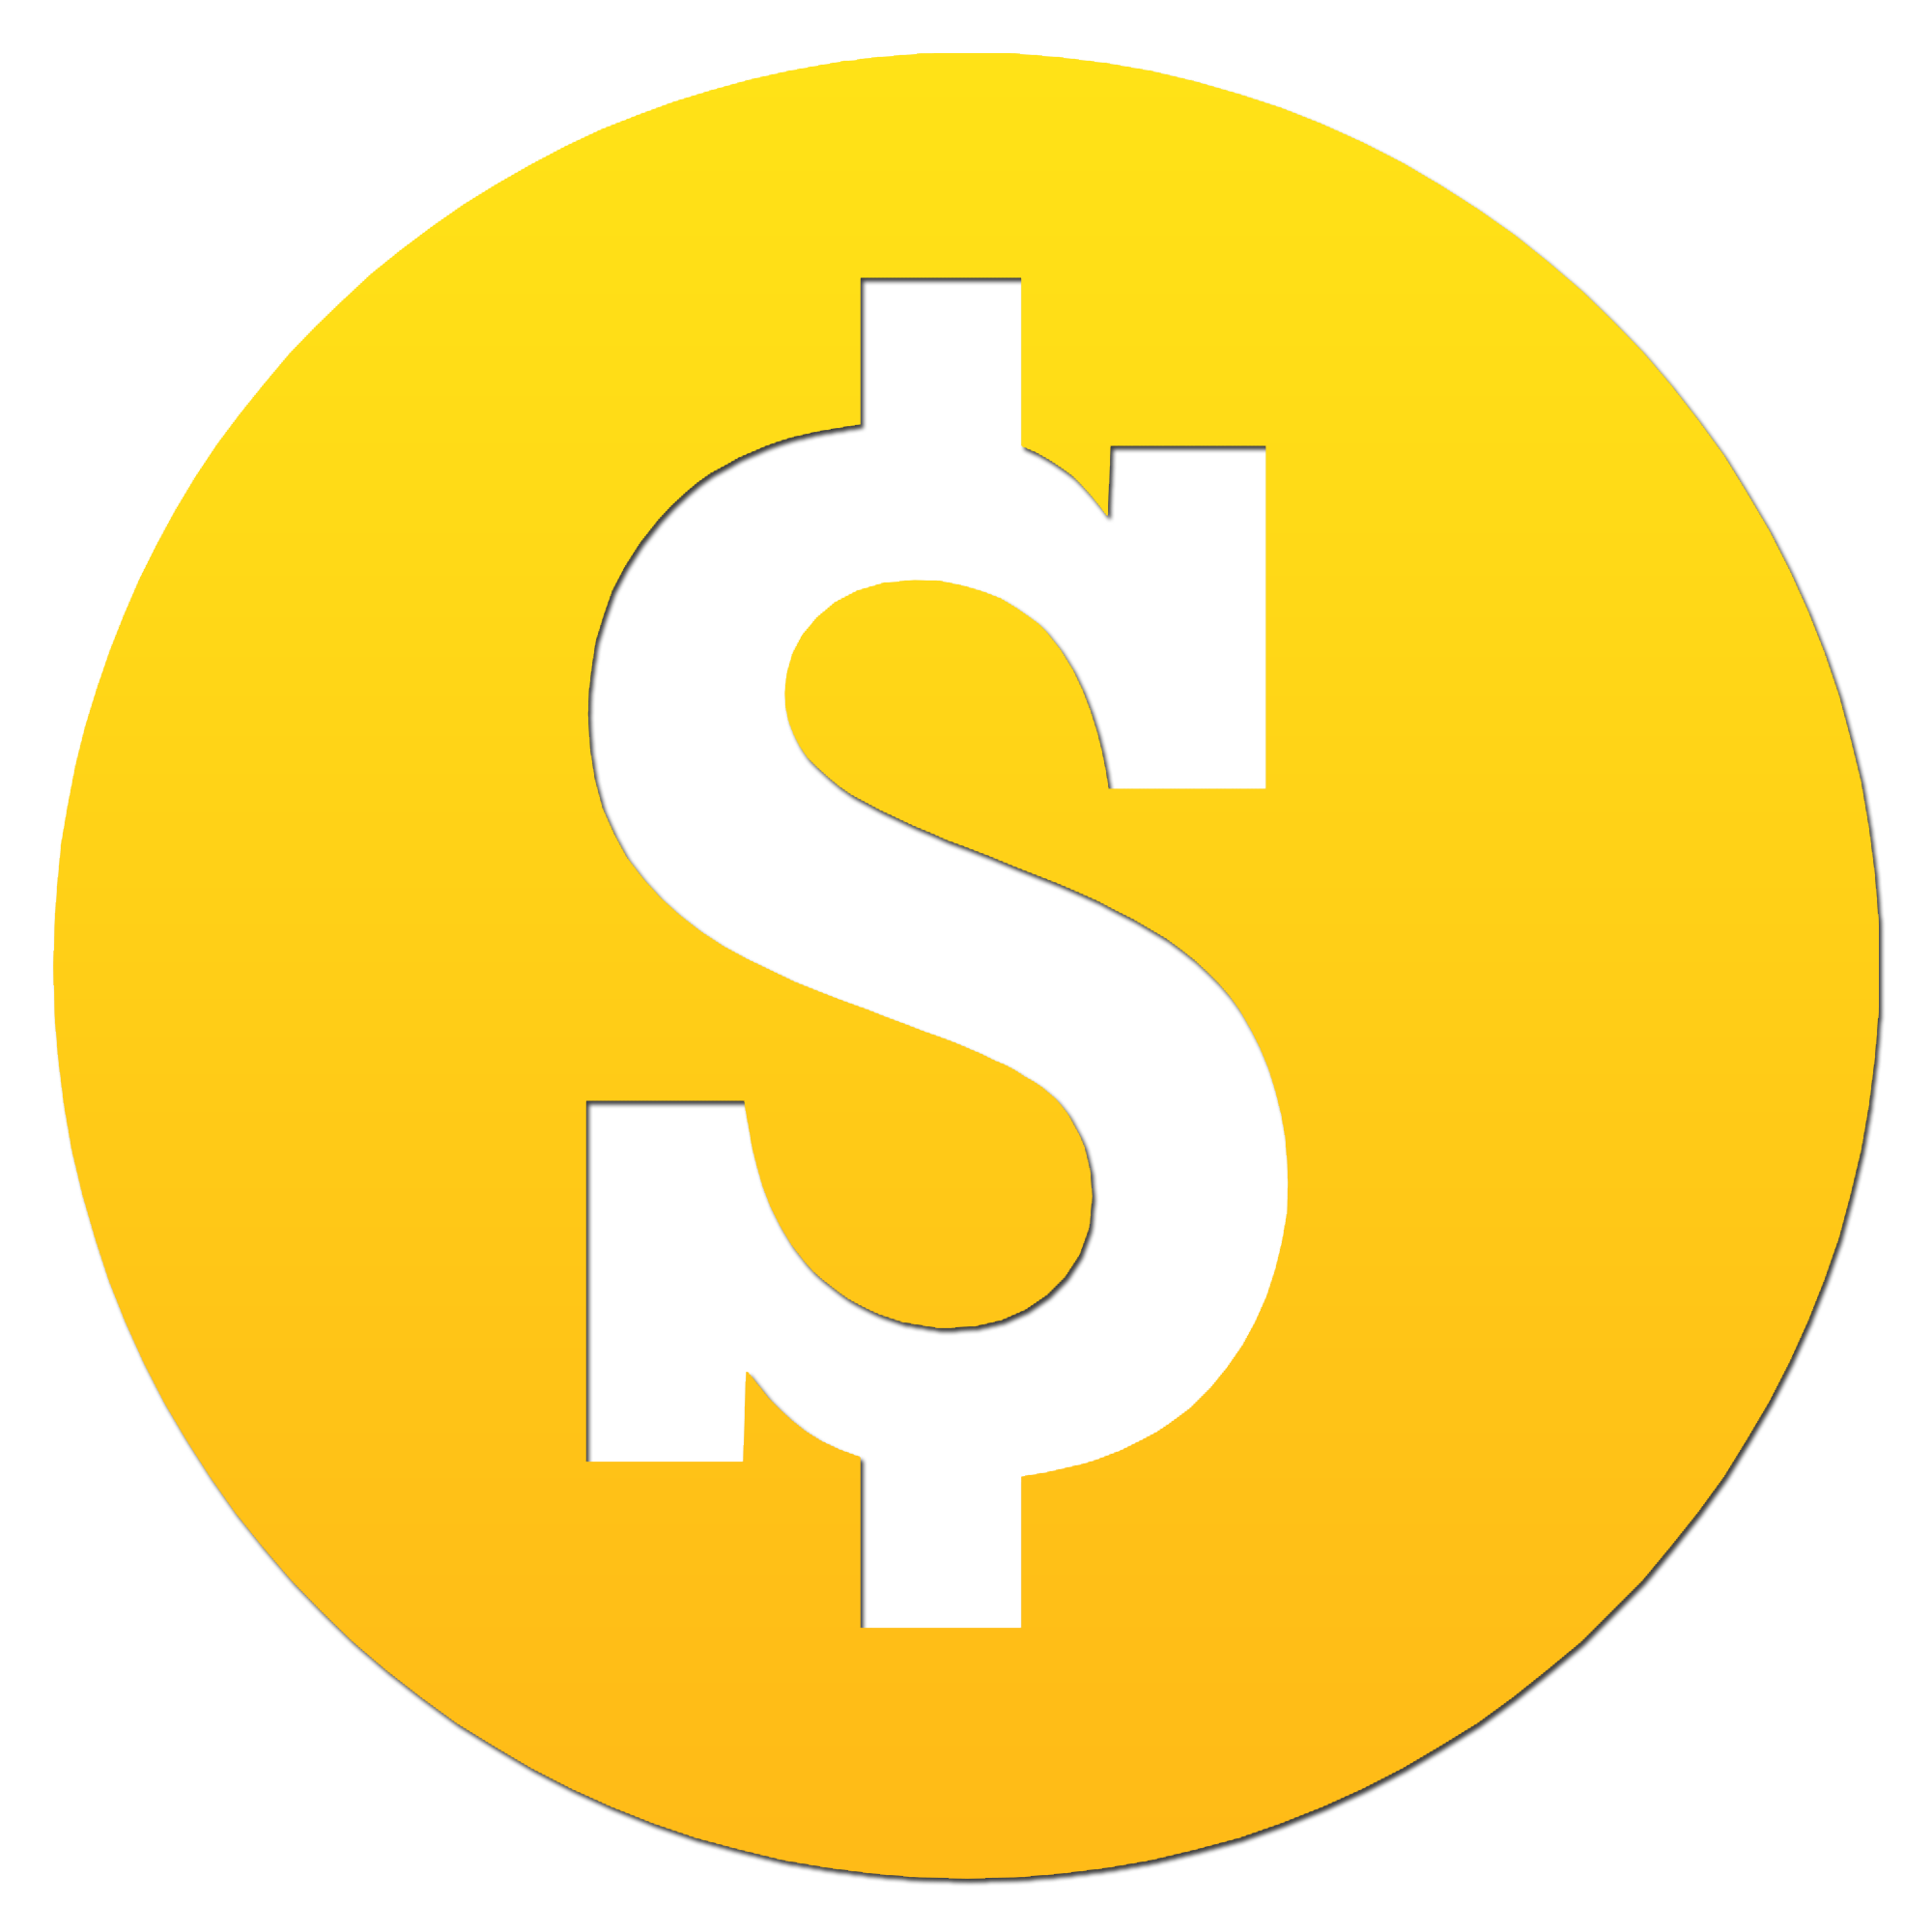 Free Money Sign Png, Download Free Clip Art, Free Clip Art on Clipart